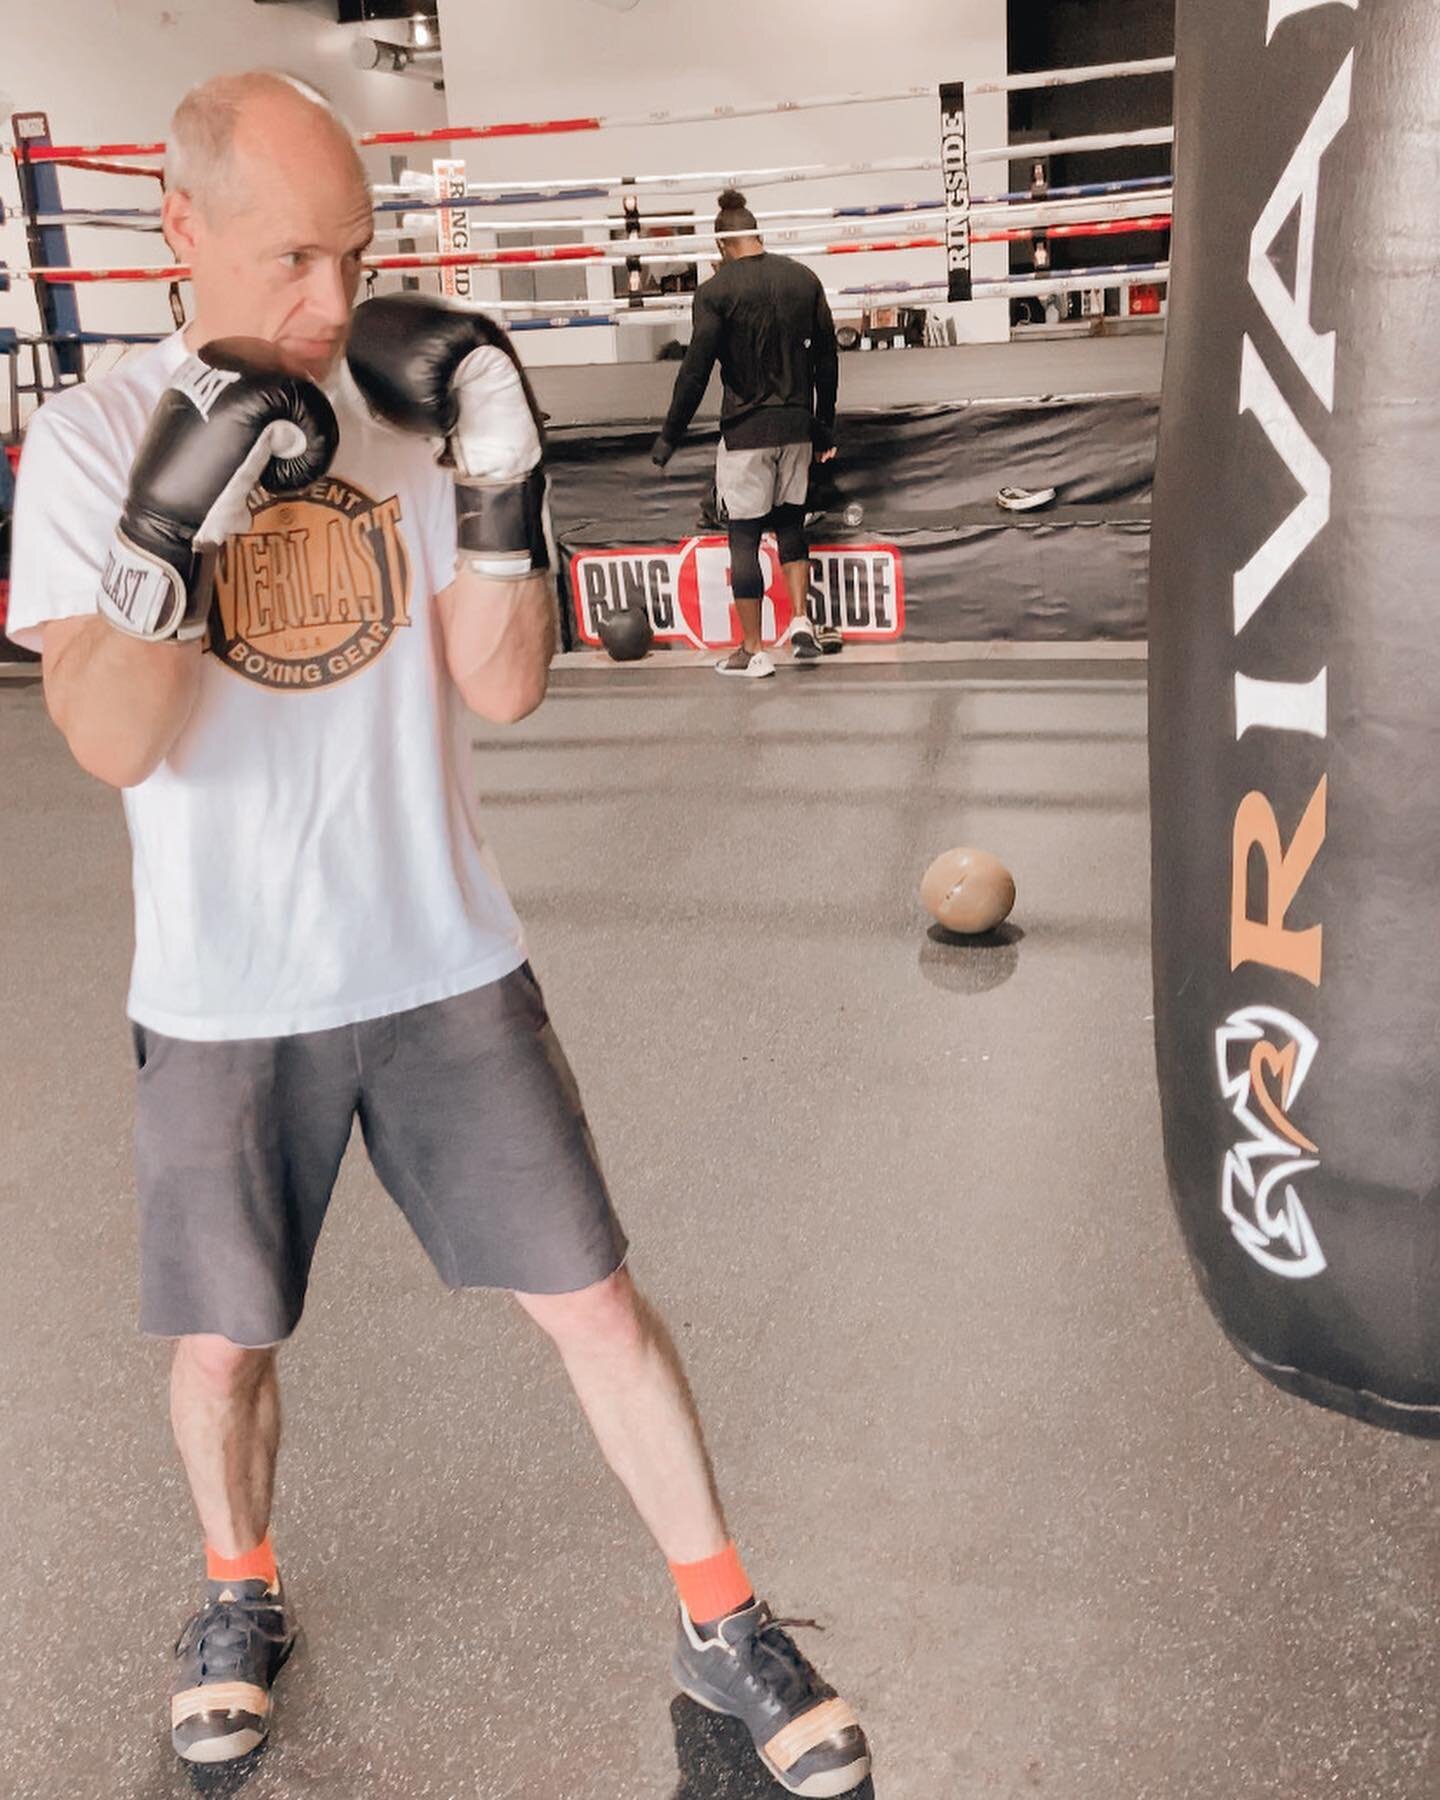 We love it when @kbonice comes by and participates in our class 🥊💪
.
.
.
.
13th Round Fight for Life is a charitable program serving at-risk youth. We combine boxing instruction with life skills workshops and academic and social support.
&nbsp;
We 